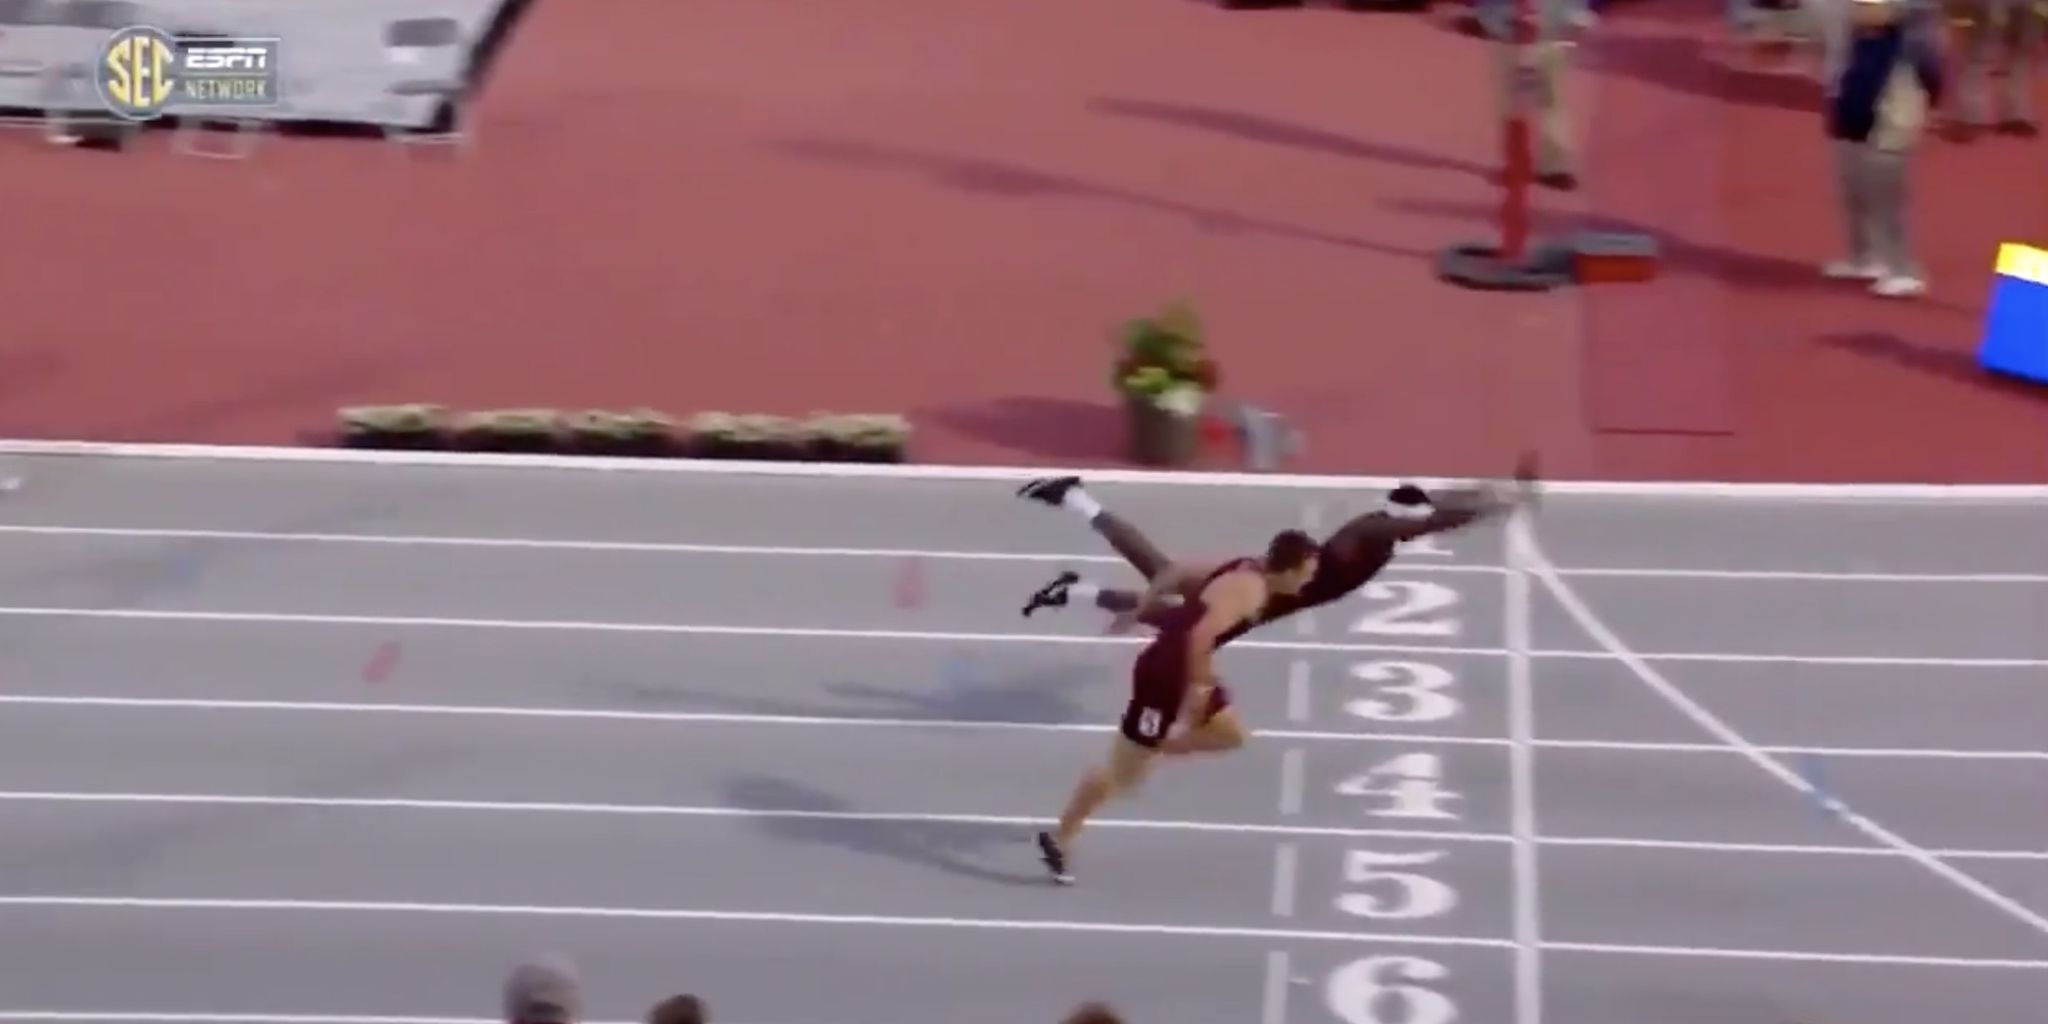 Why we're in awe of this guy's epic finish